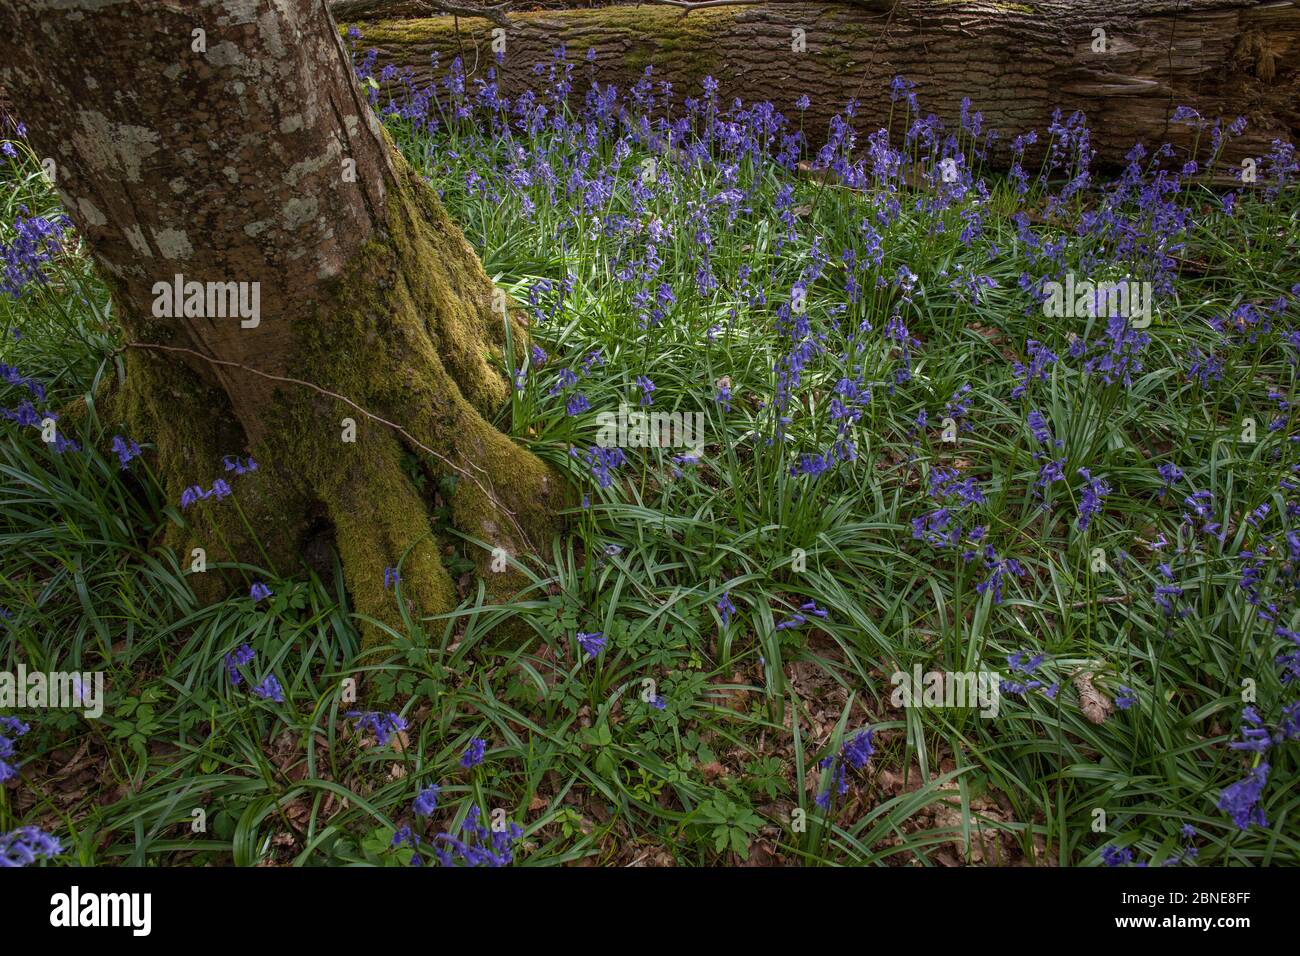 Common bluebells (Hyacinthoides non-scripta) Compiegne forest, France, April. Stock Photo